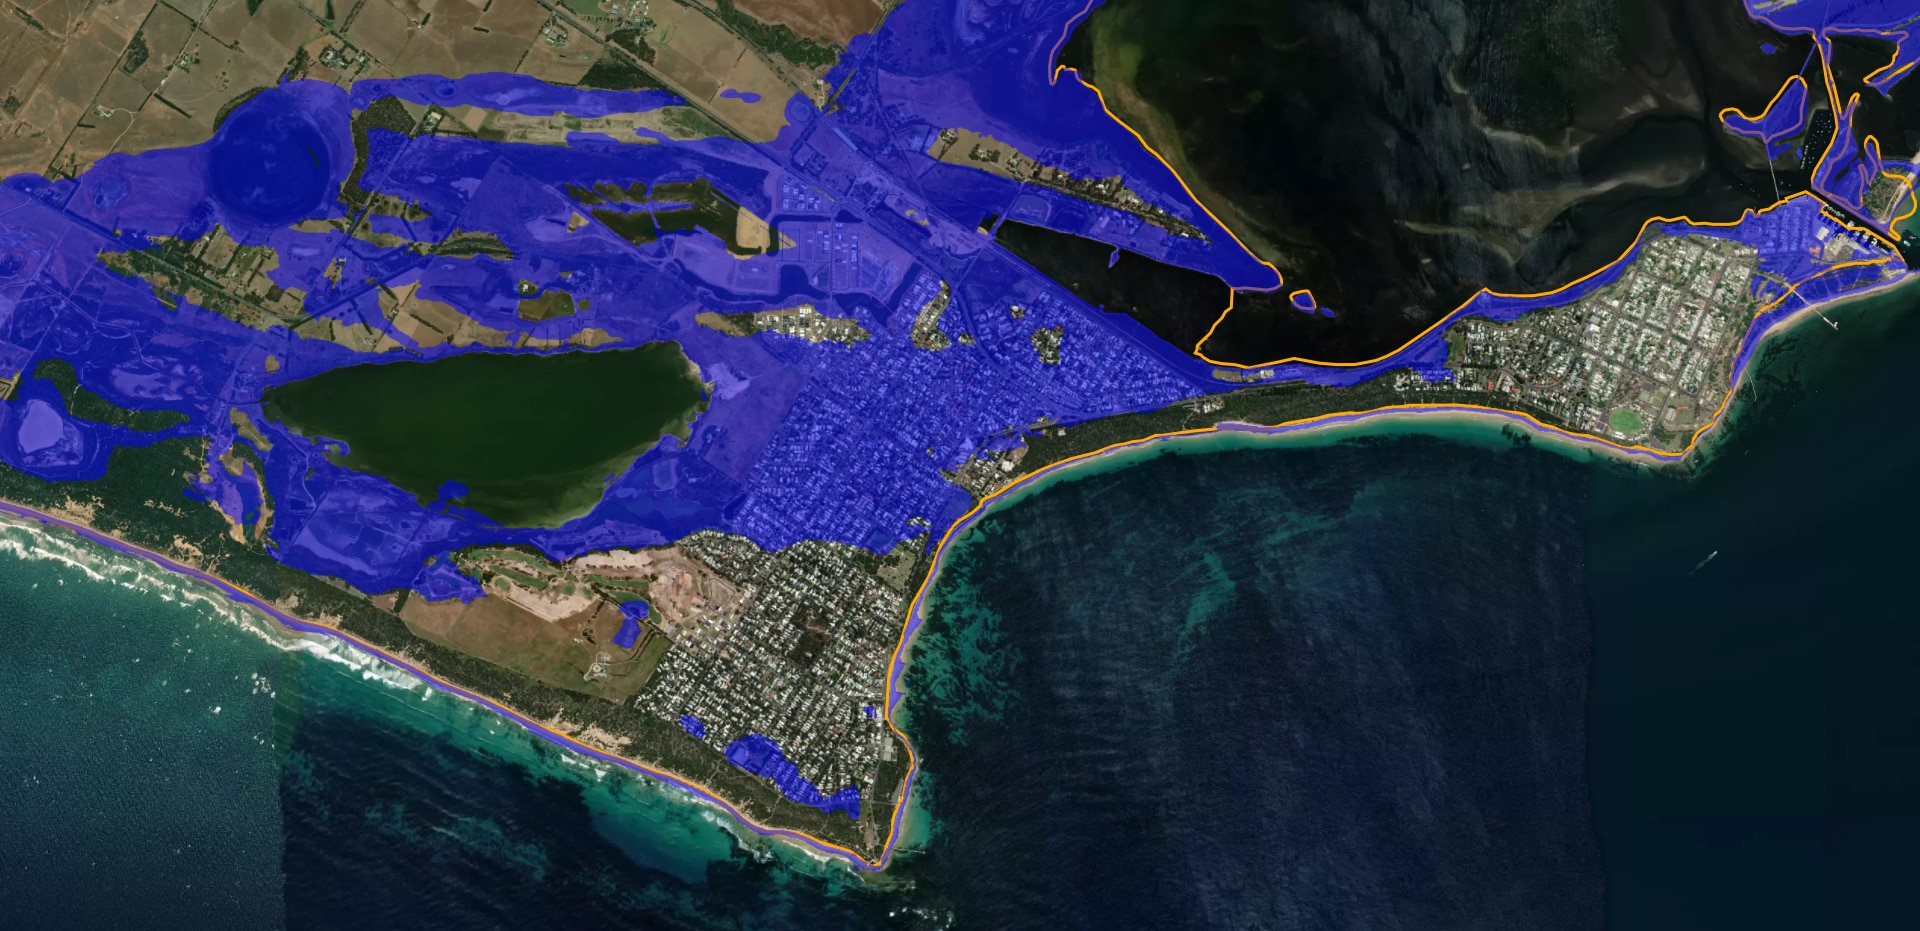 Victorian government flood mapping show ocean levels during a storm surge at Point Lonsdale with a predicted 82cm sea level rise.